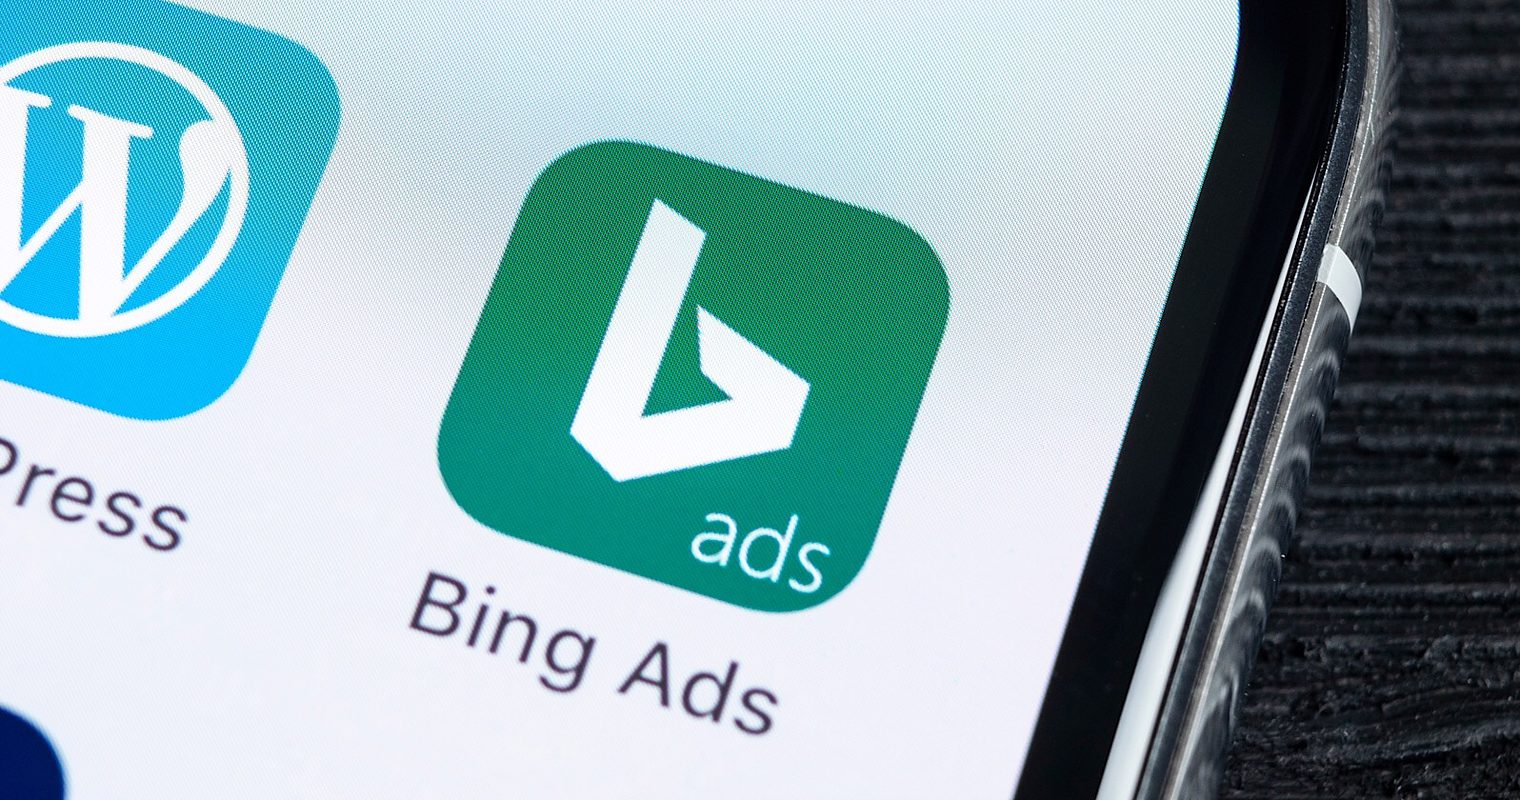 Bing Bans Ads for Cryptocurrency